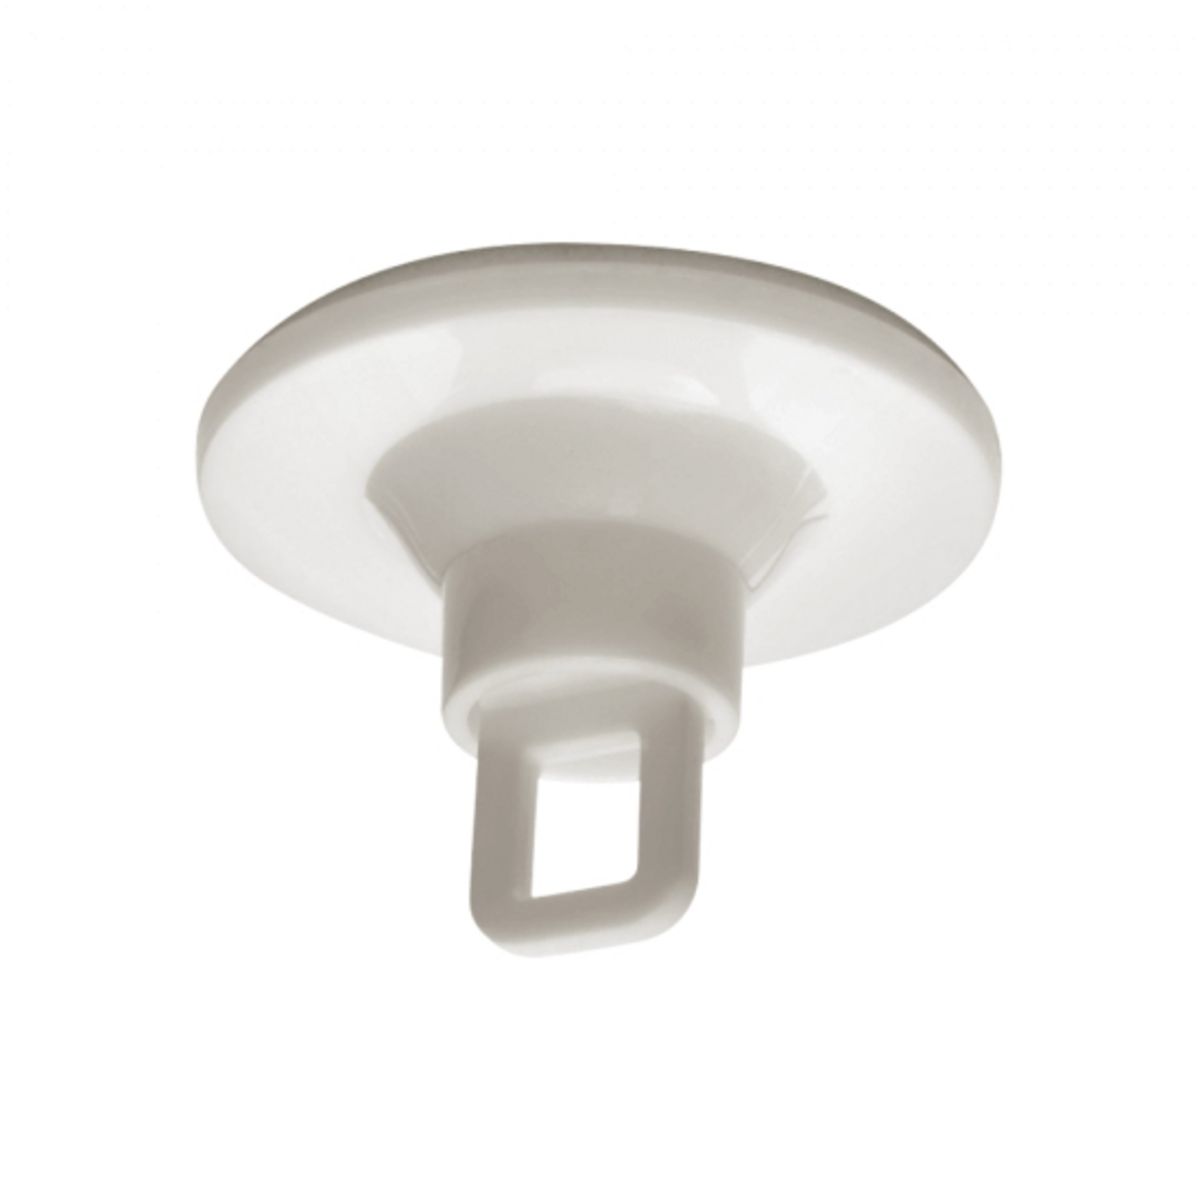 Round Ceiling Hanger Buttons With Swivel Eyelet x 100.png